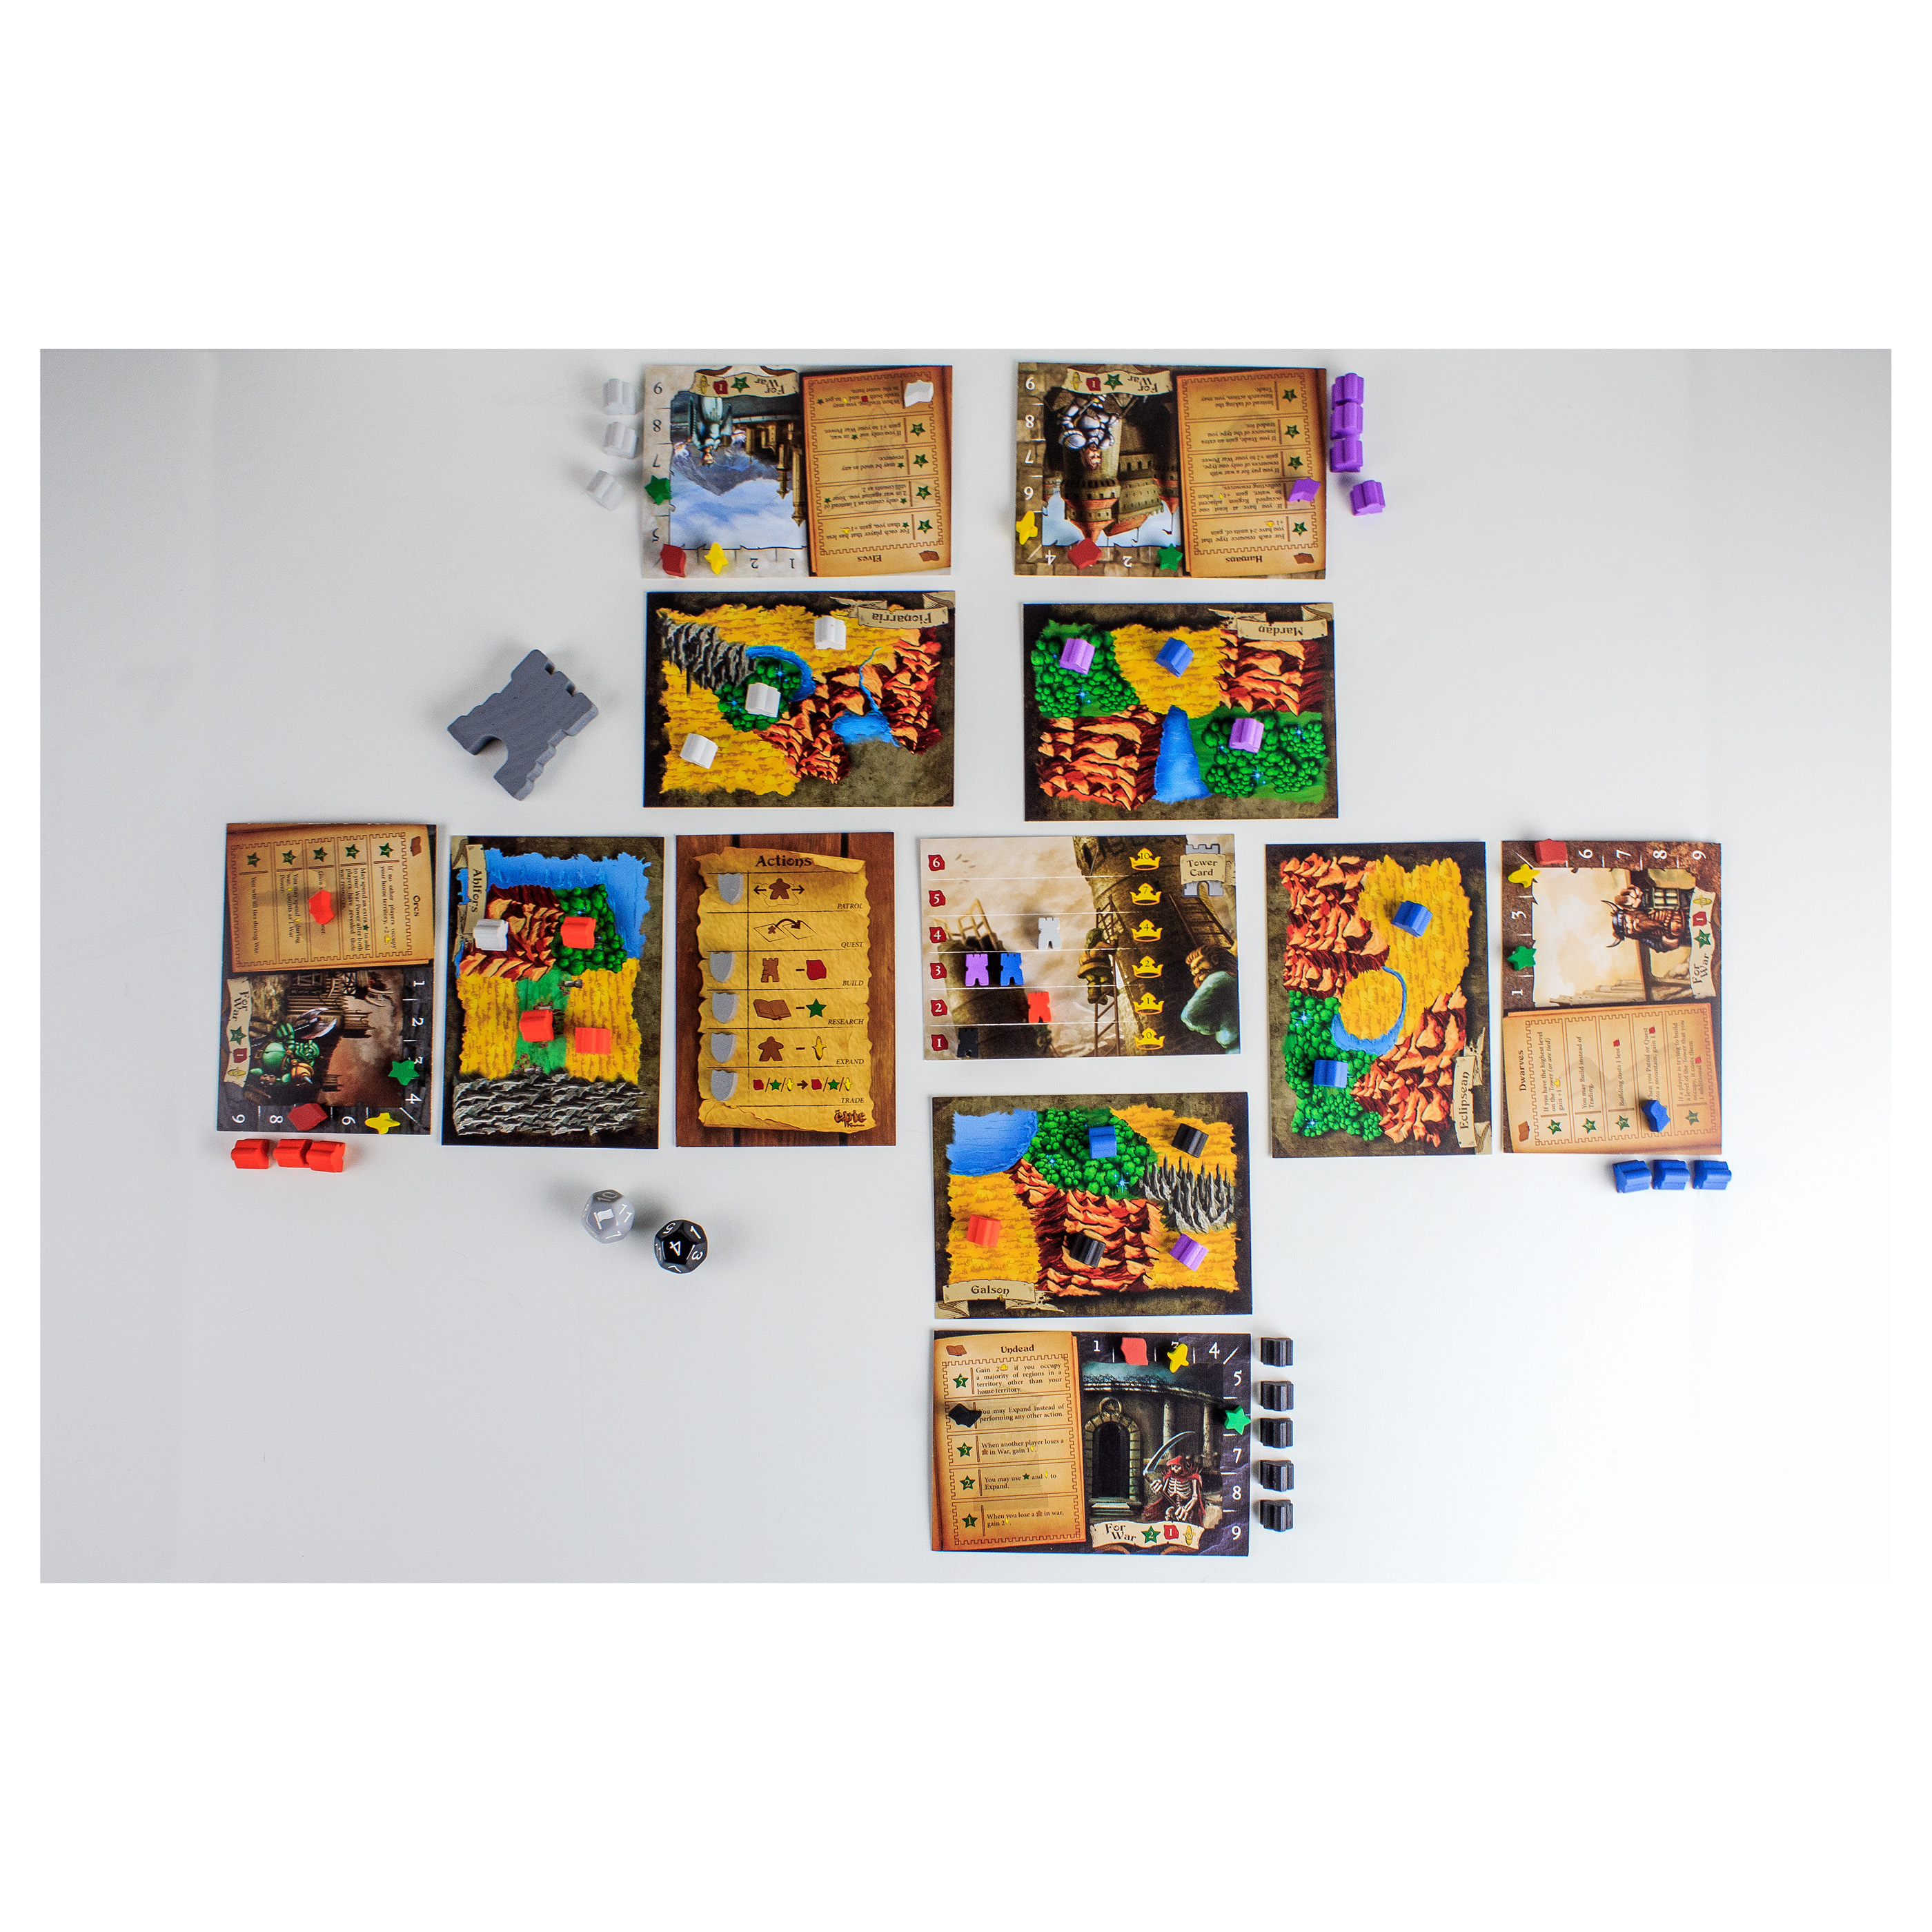 Tiny Epic Kingdoms Strategy Board Game: a Small Box 4X Fantasy Game by Scott almes - image 2 of 4